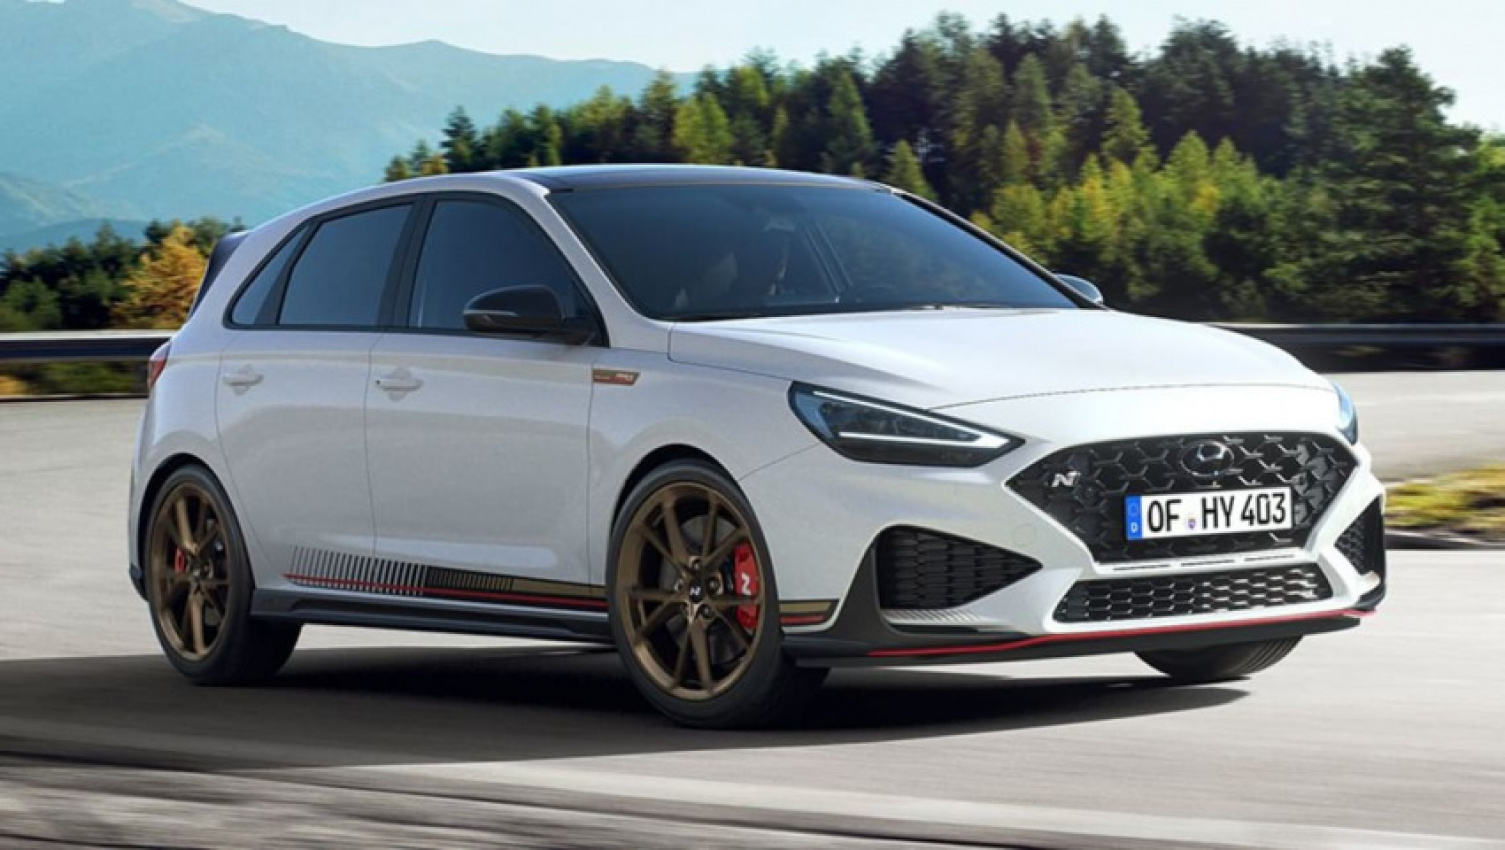 autos, cars, ford, hyundai, ford focus, hatchback, hot hatches, hyundai hatchback range, hyundai i30, hyundai i30 2022, hyundai news, industry news, showroom news, 2022 hyundai i30 n hatchback scores its first special edition! drive-n limited edition arriving soon with bespoke looks to take on vw golf gti and ford focus st